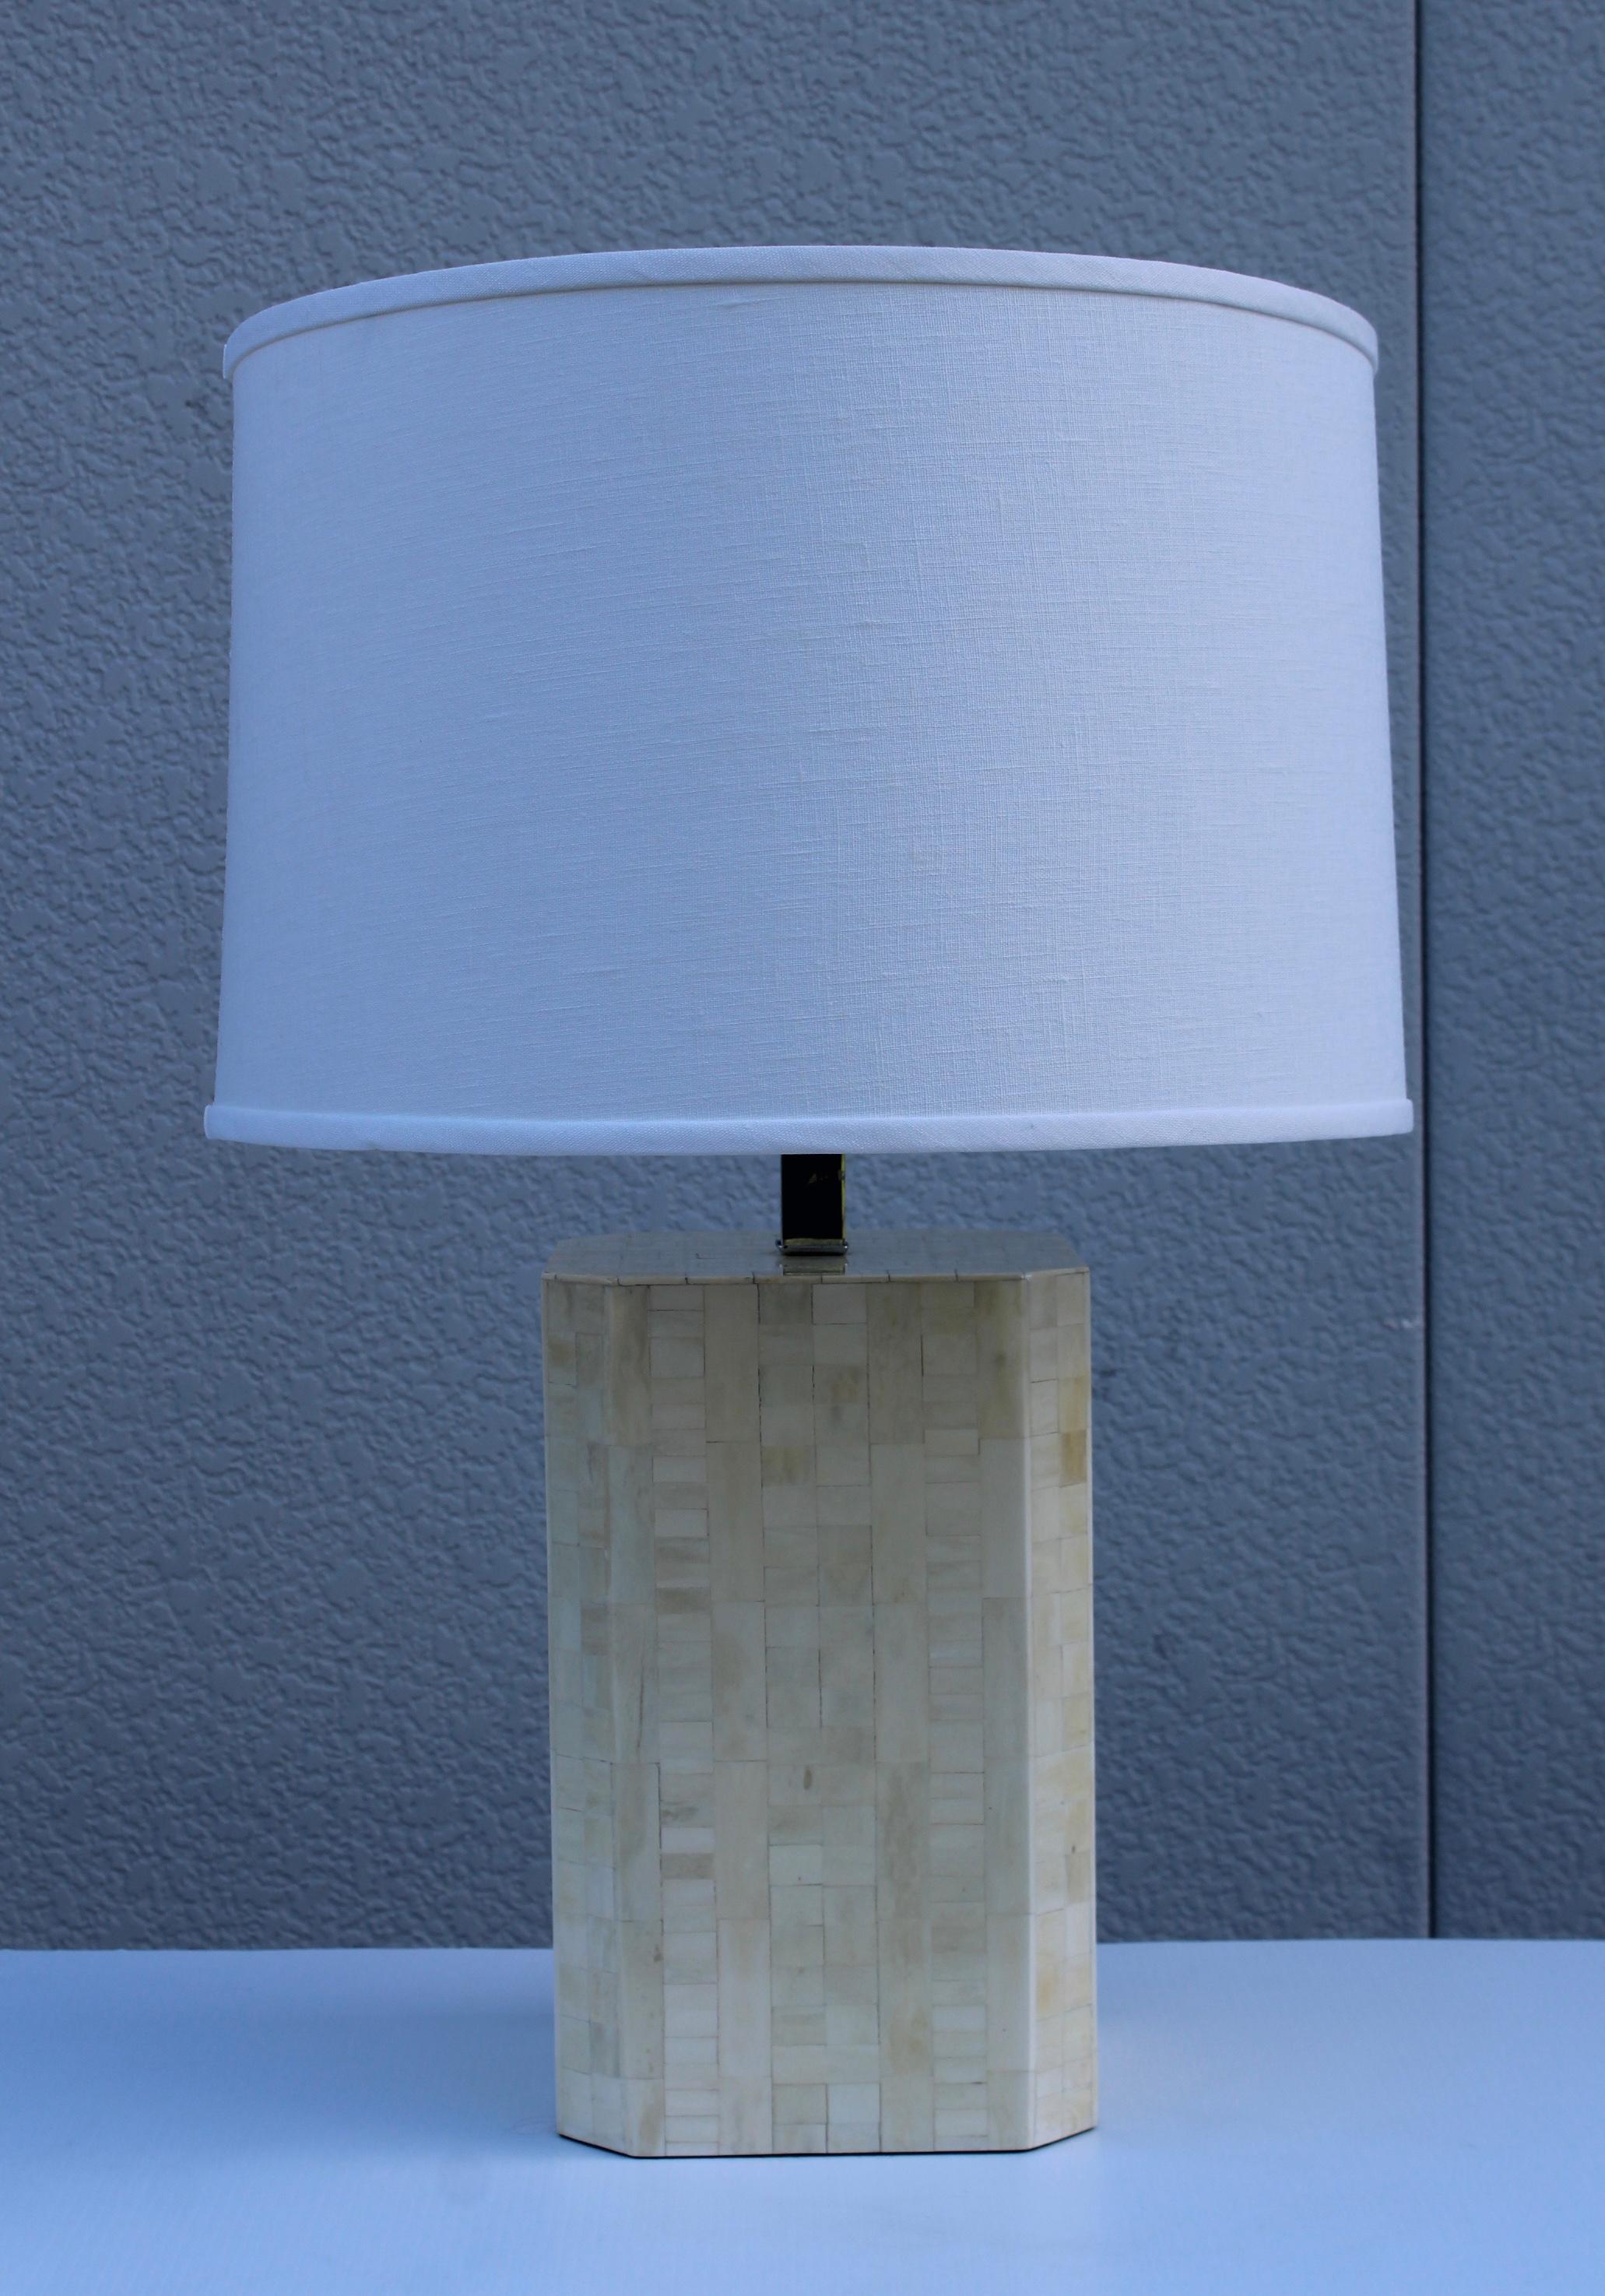 1970s mid-century modern tesselated bone with chrome hardware table lamp, in vintage original condition with minor wear and patina due to age and use.